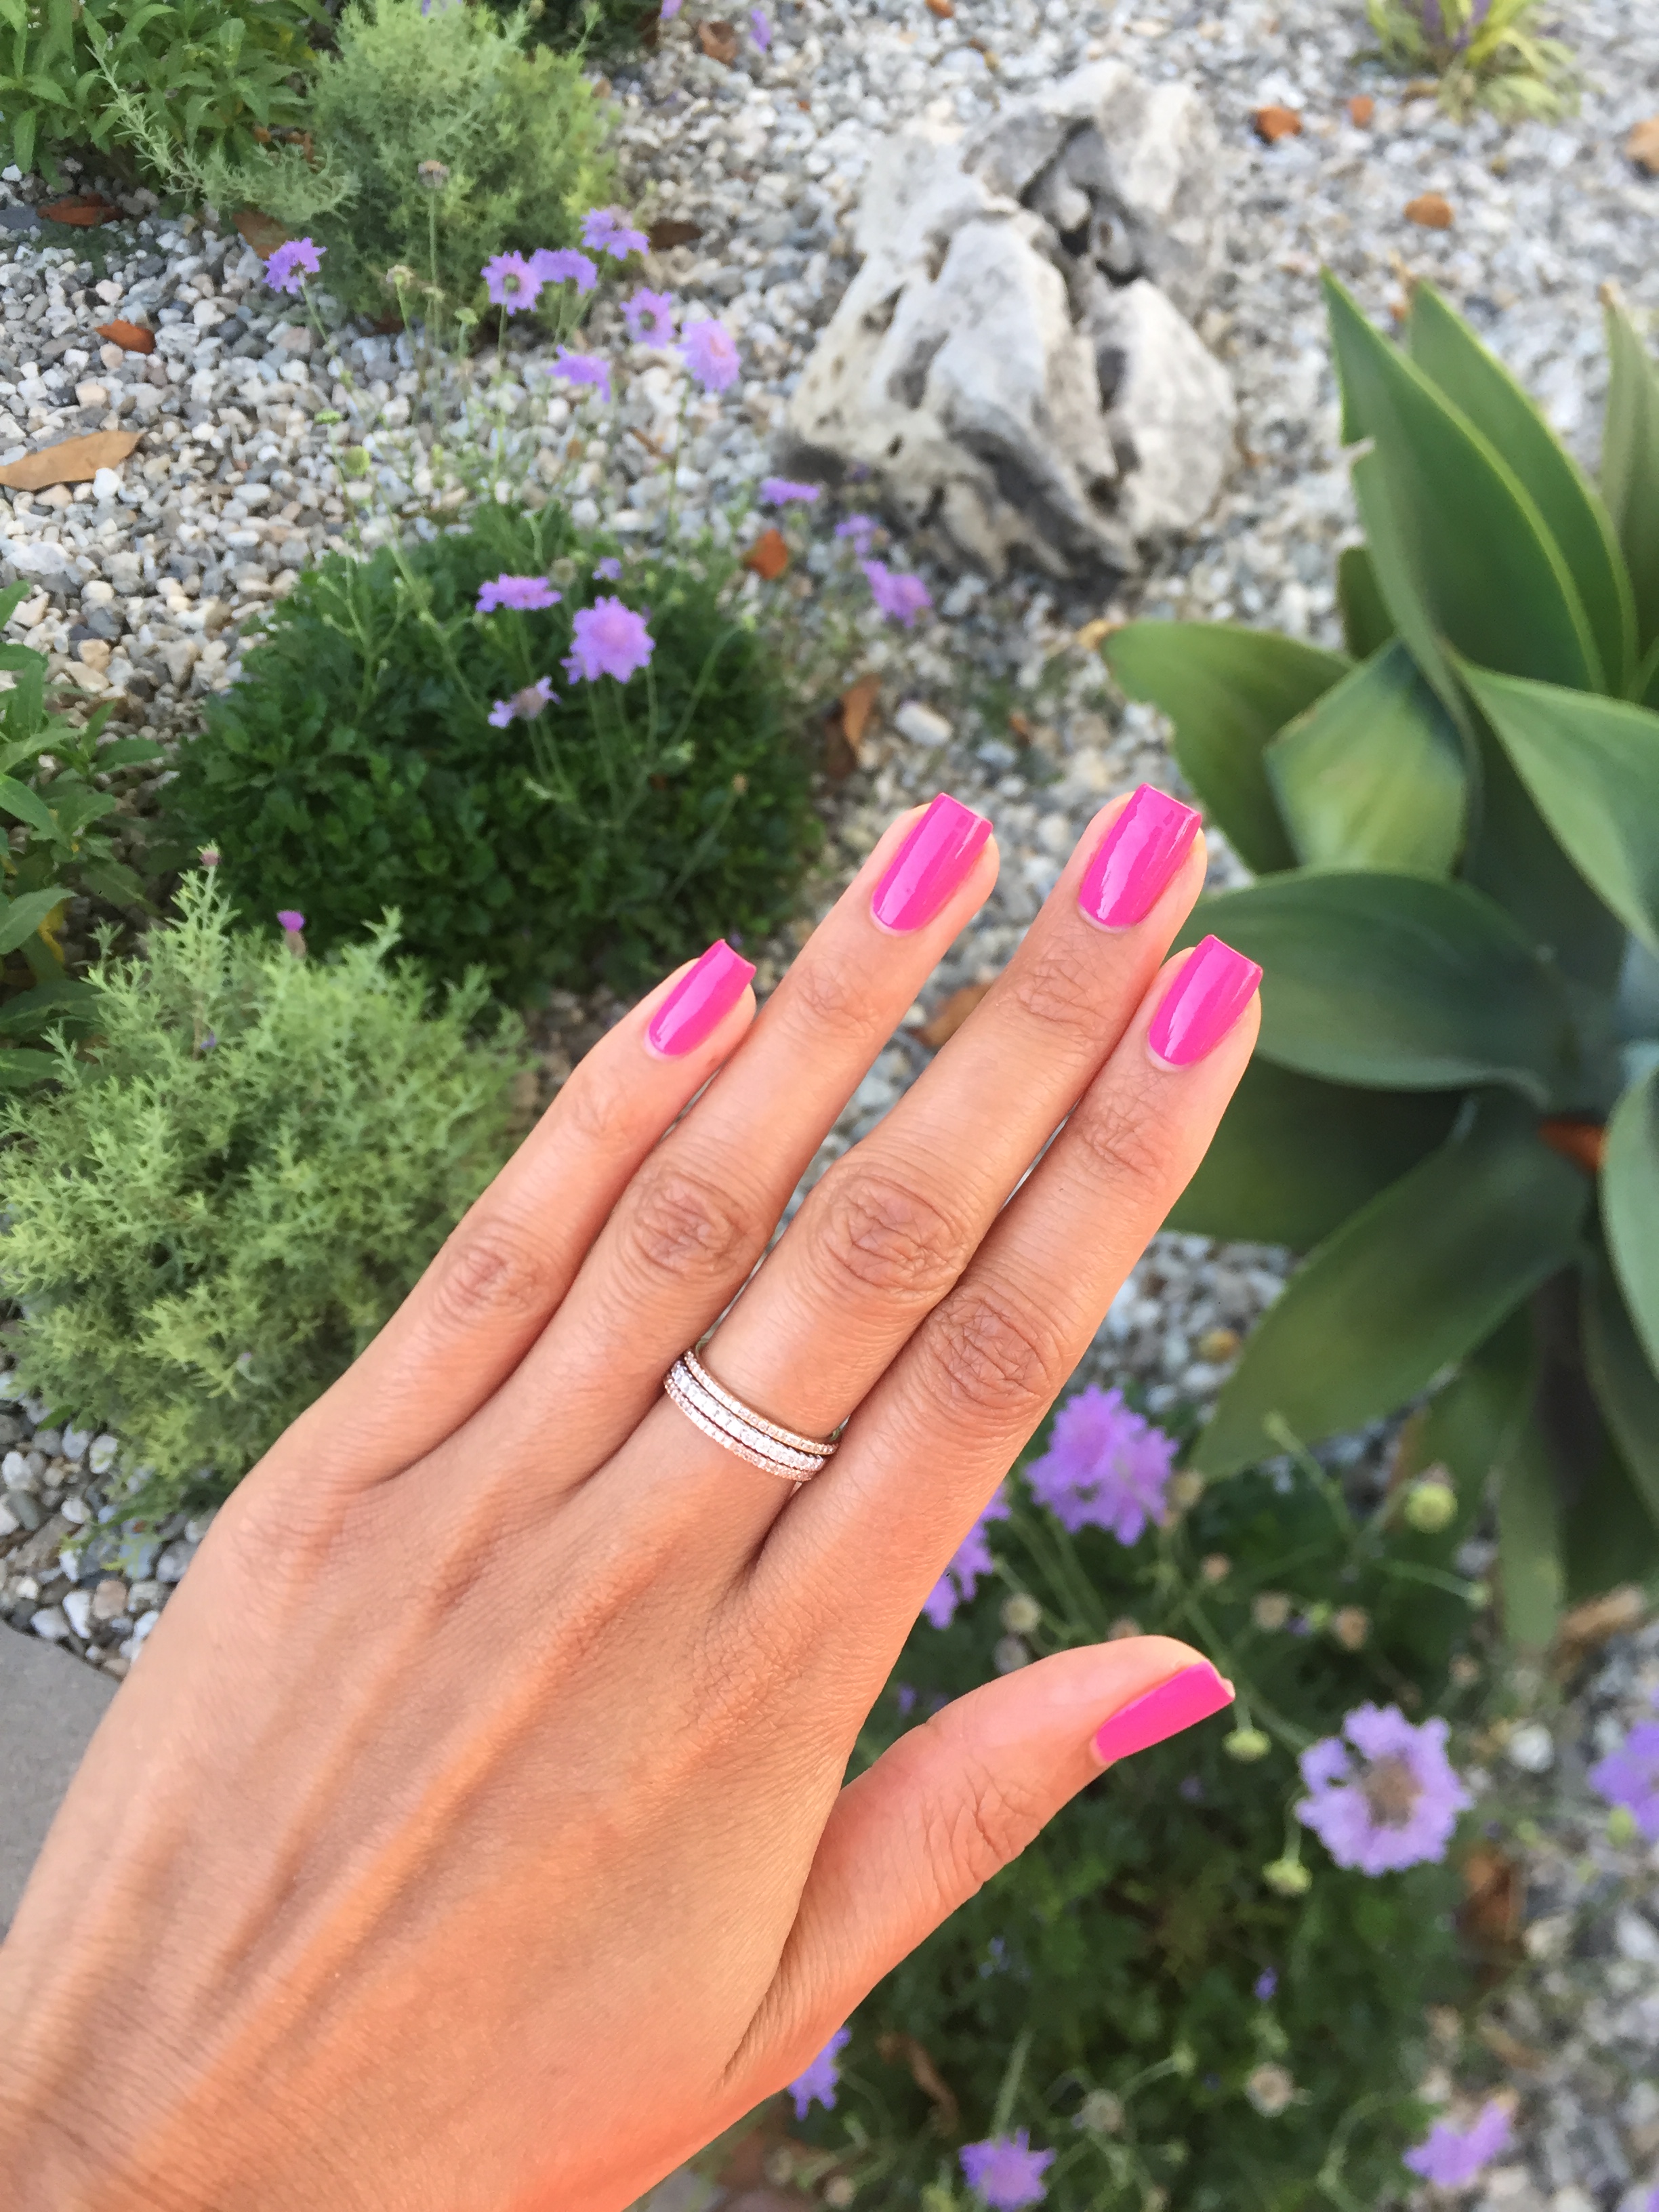 The Best Medicine - Essie Off the Shoulder | Nail polish, Sassy nails, How  to do nails